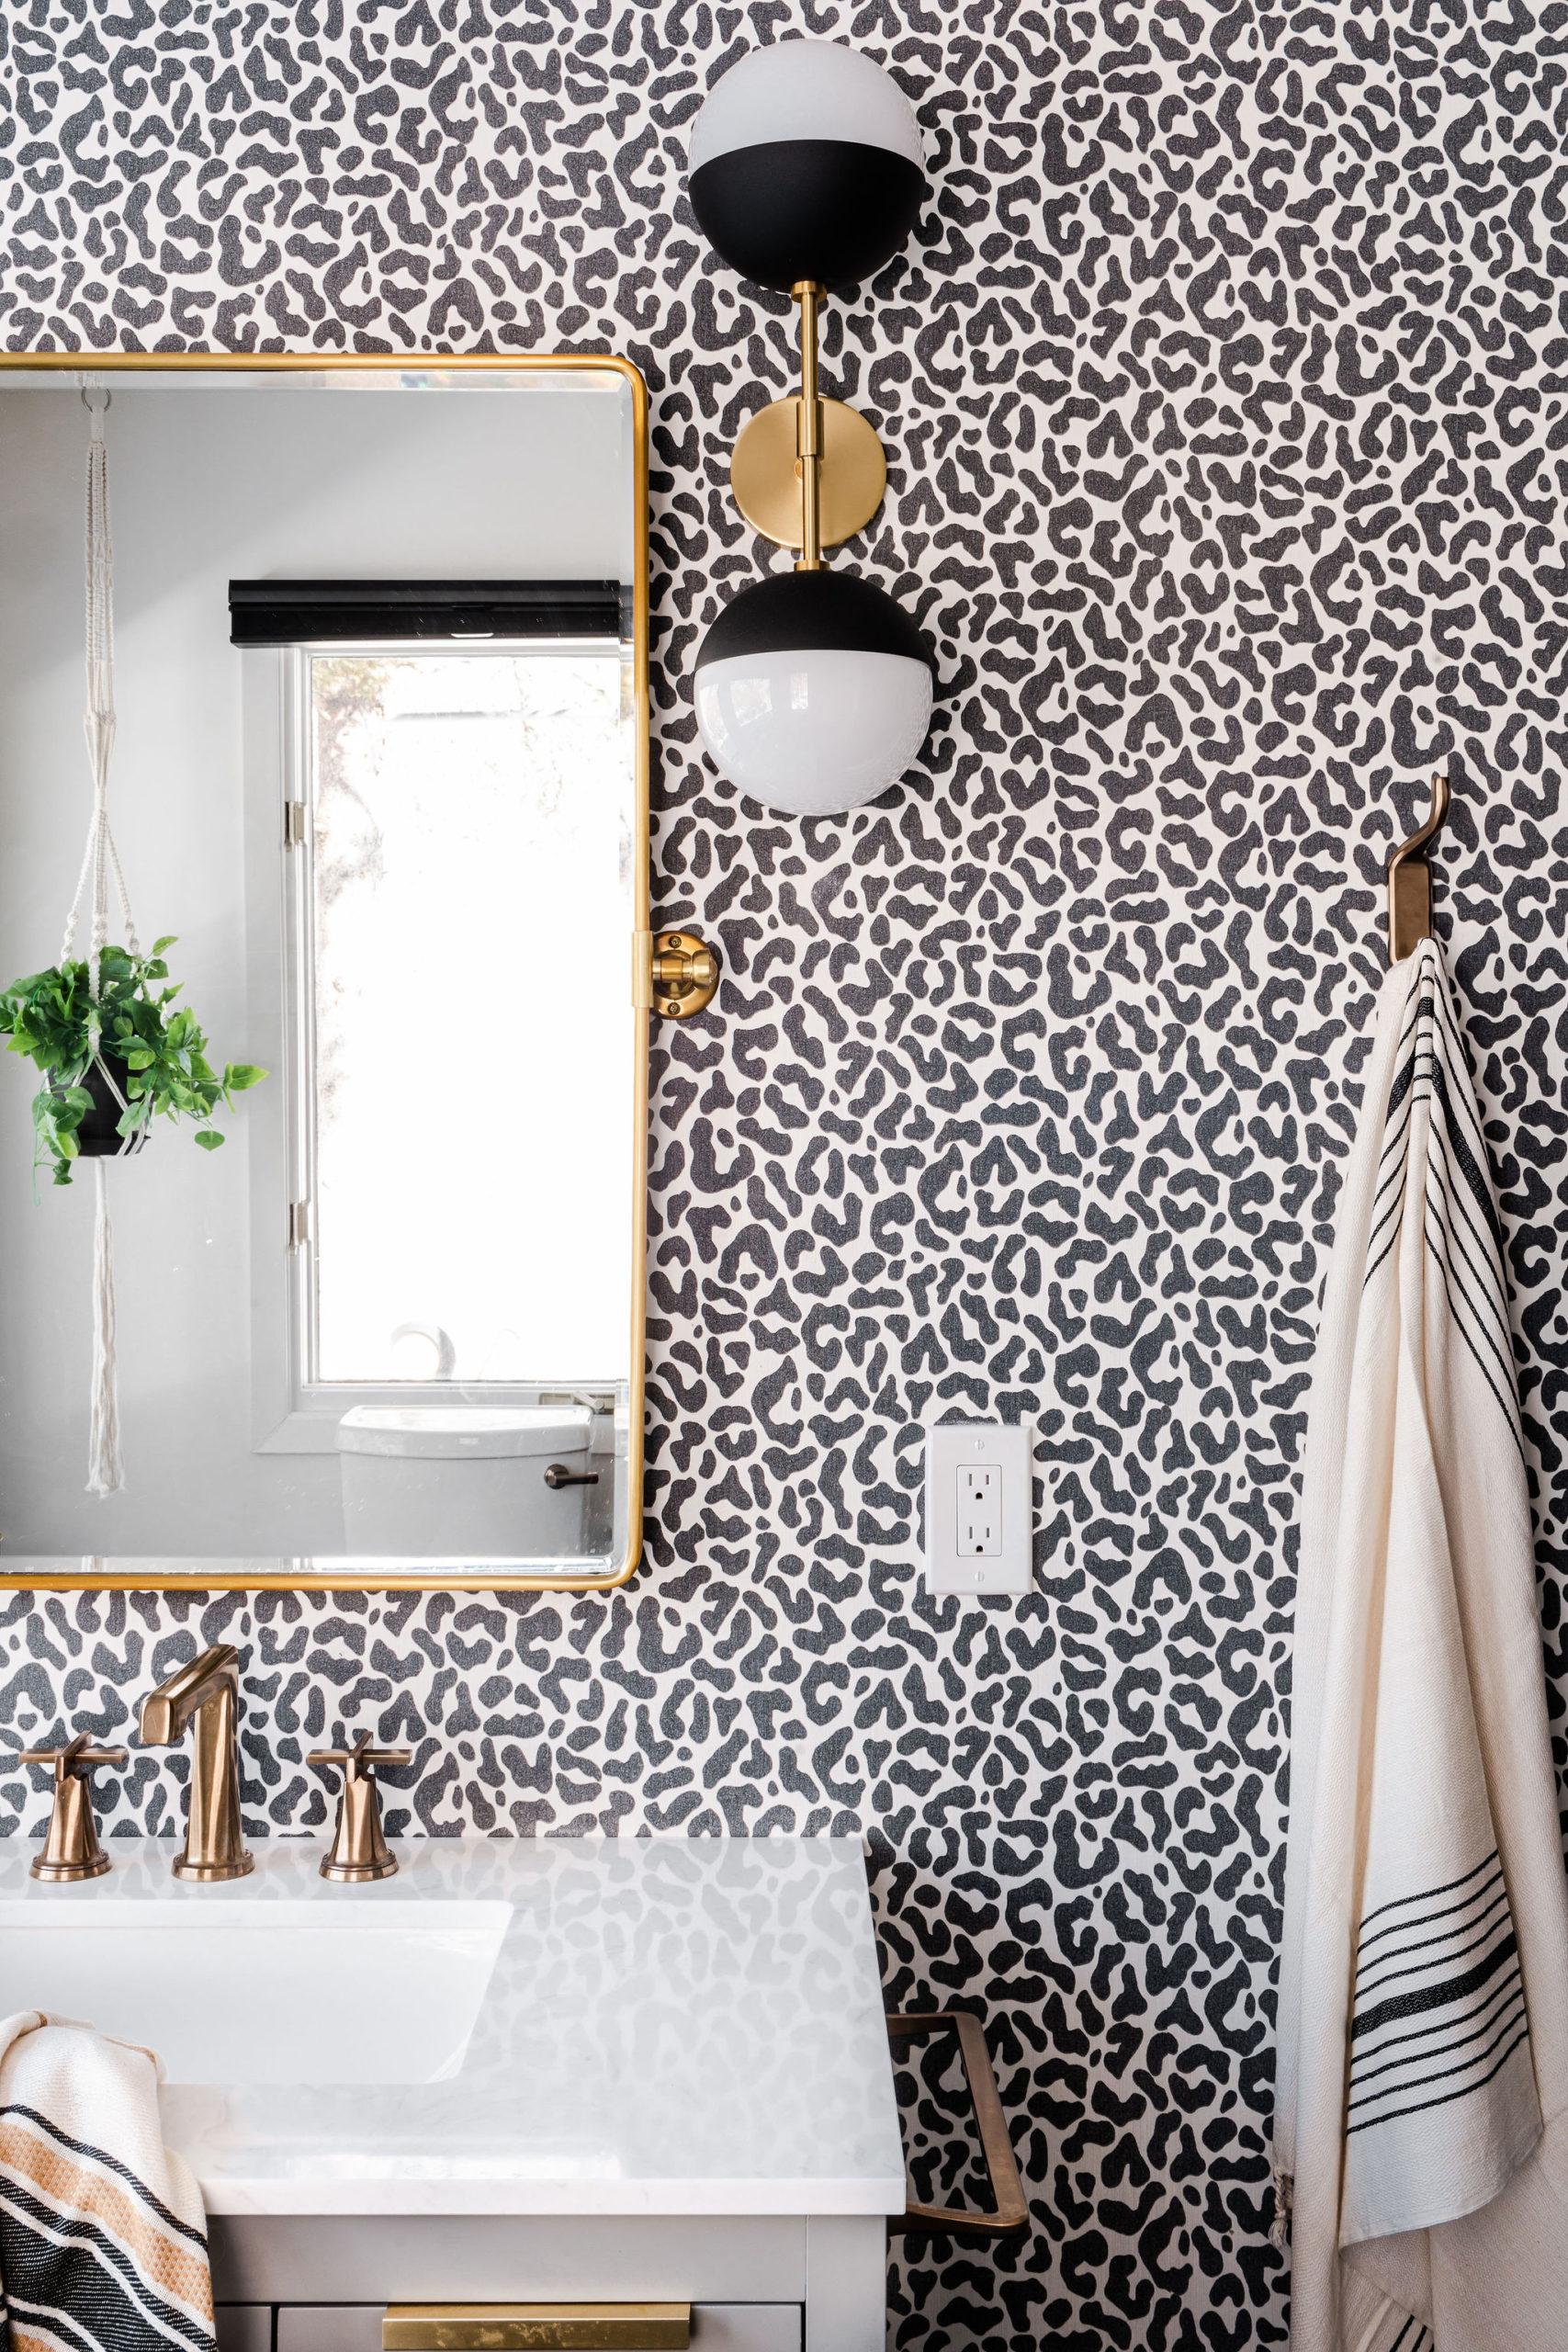 Enhance Your Bathroom with a Few Simple Updates 2